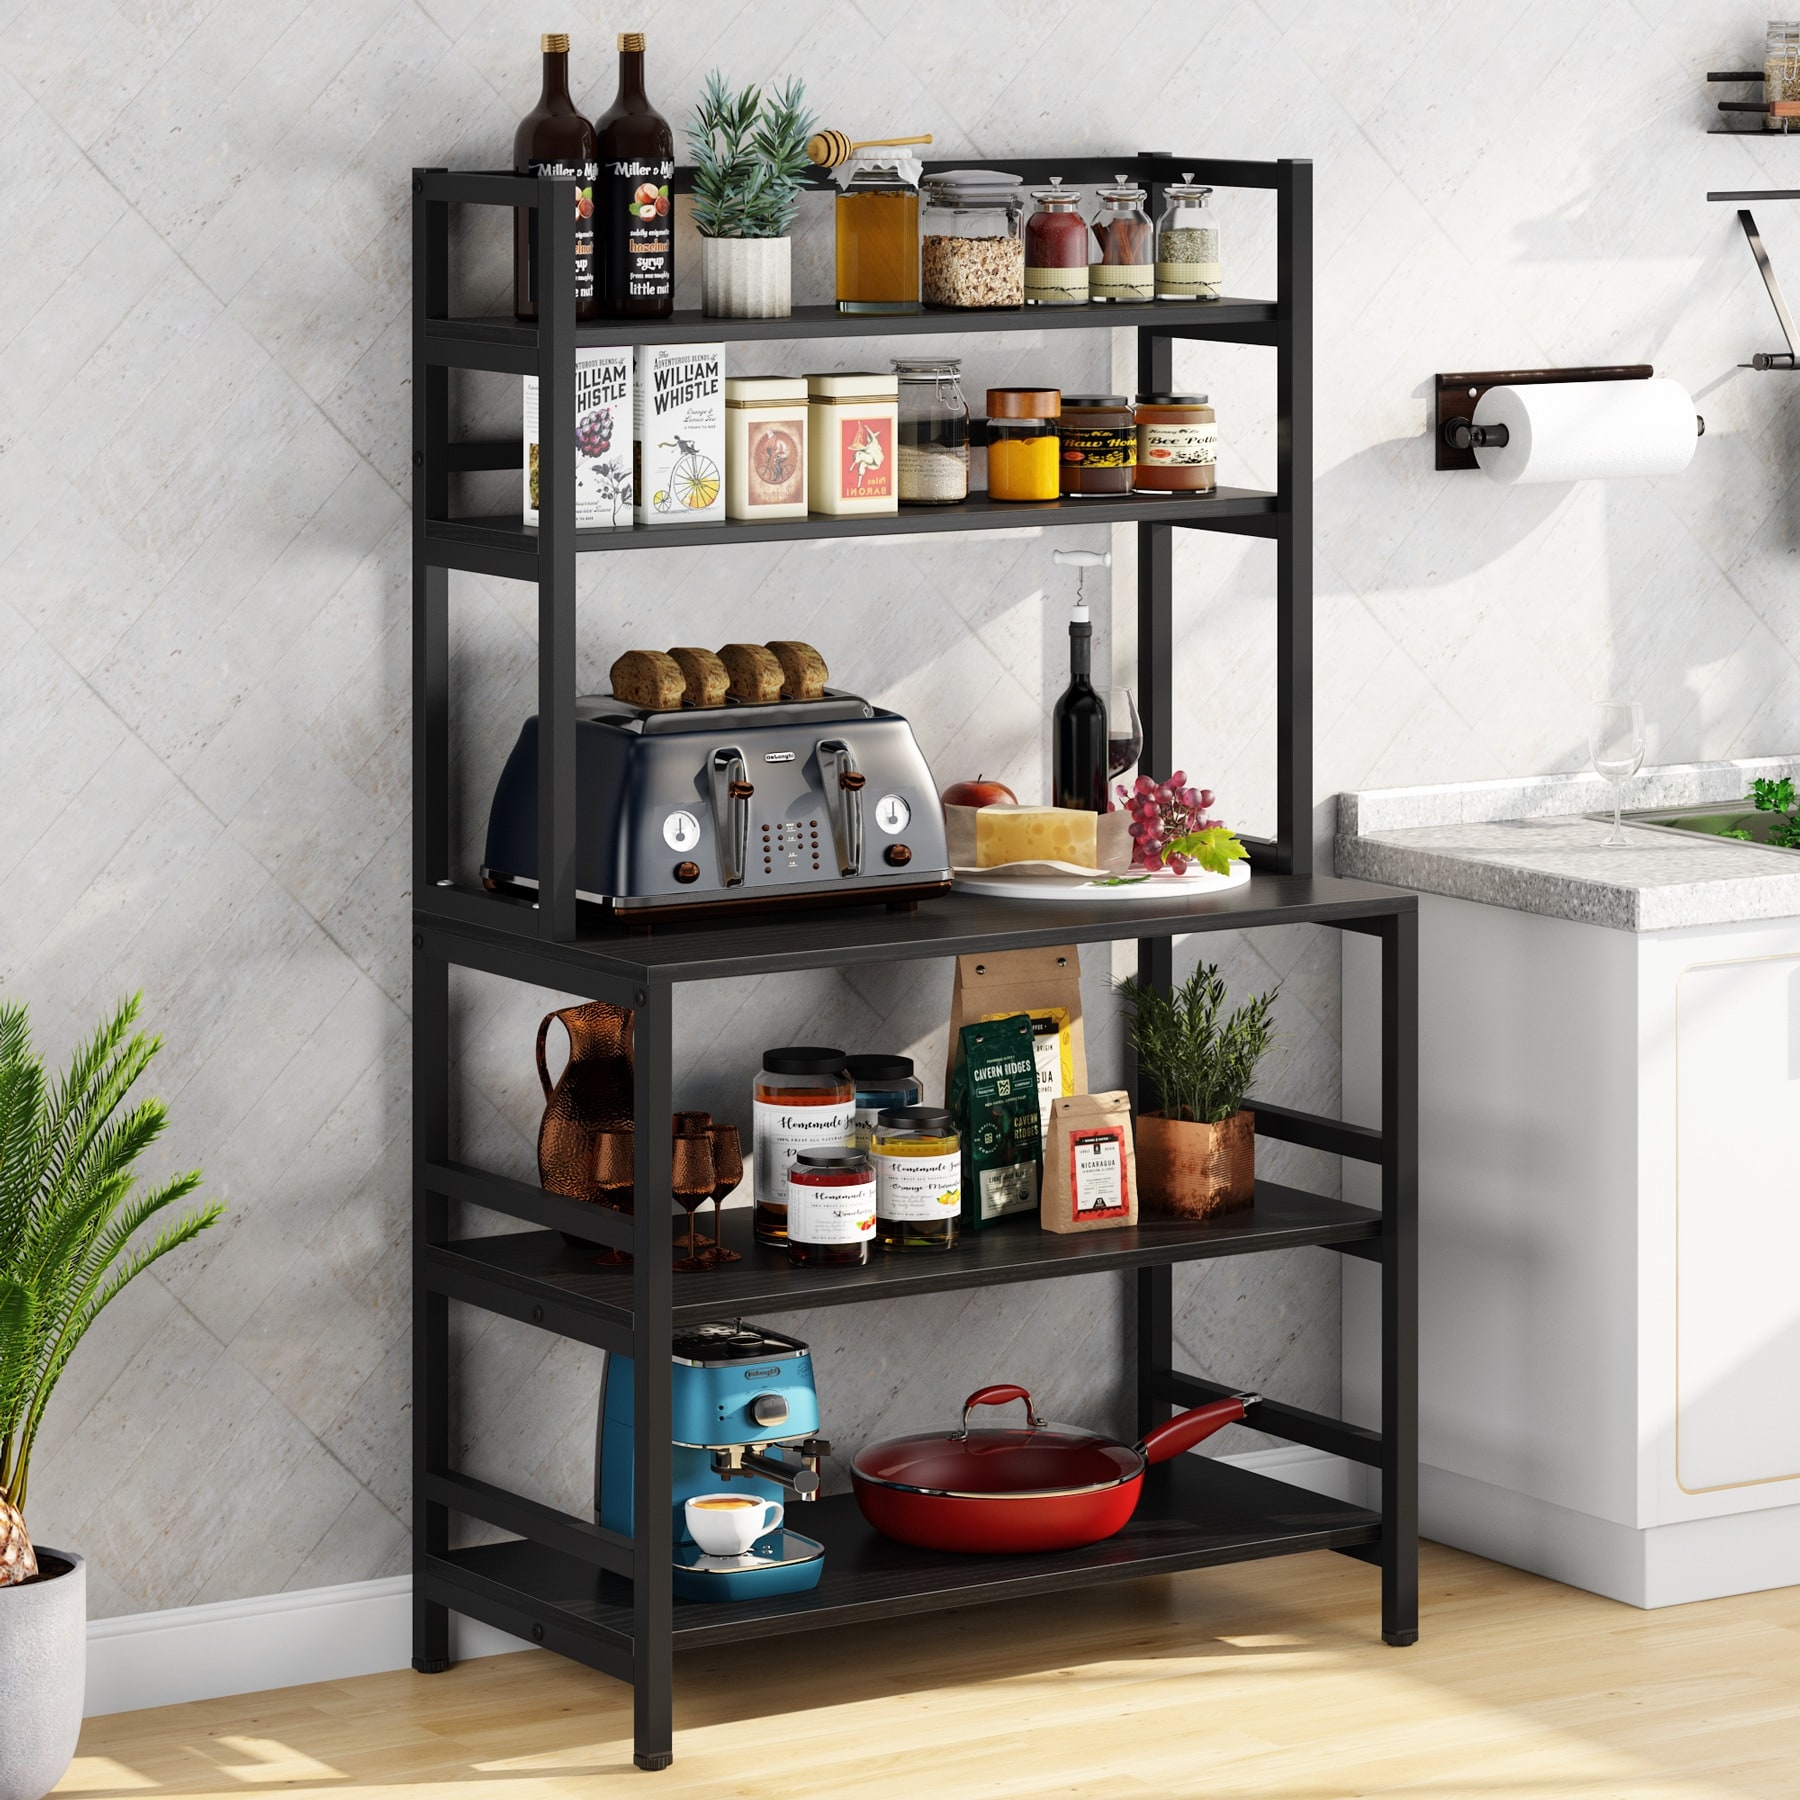 https://ak1.ostkcdn.com/images/products/is/images/direct/b081551bdbcfb79effa2422544ed6a024d44afc2/5-Tier-Kitchen-Bakers-Rack-Utility-Storage-Shelf-Microwave-Oven-Stand%2C-Industrial-Microwave-Cart-Kitchen-Stand-with-Hutch.jpg